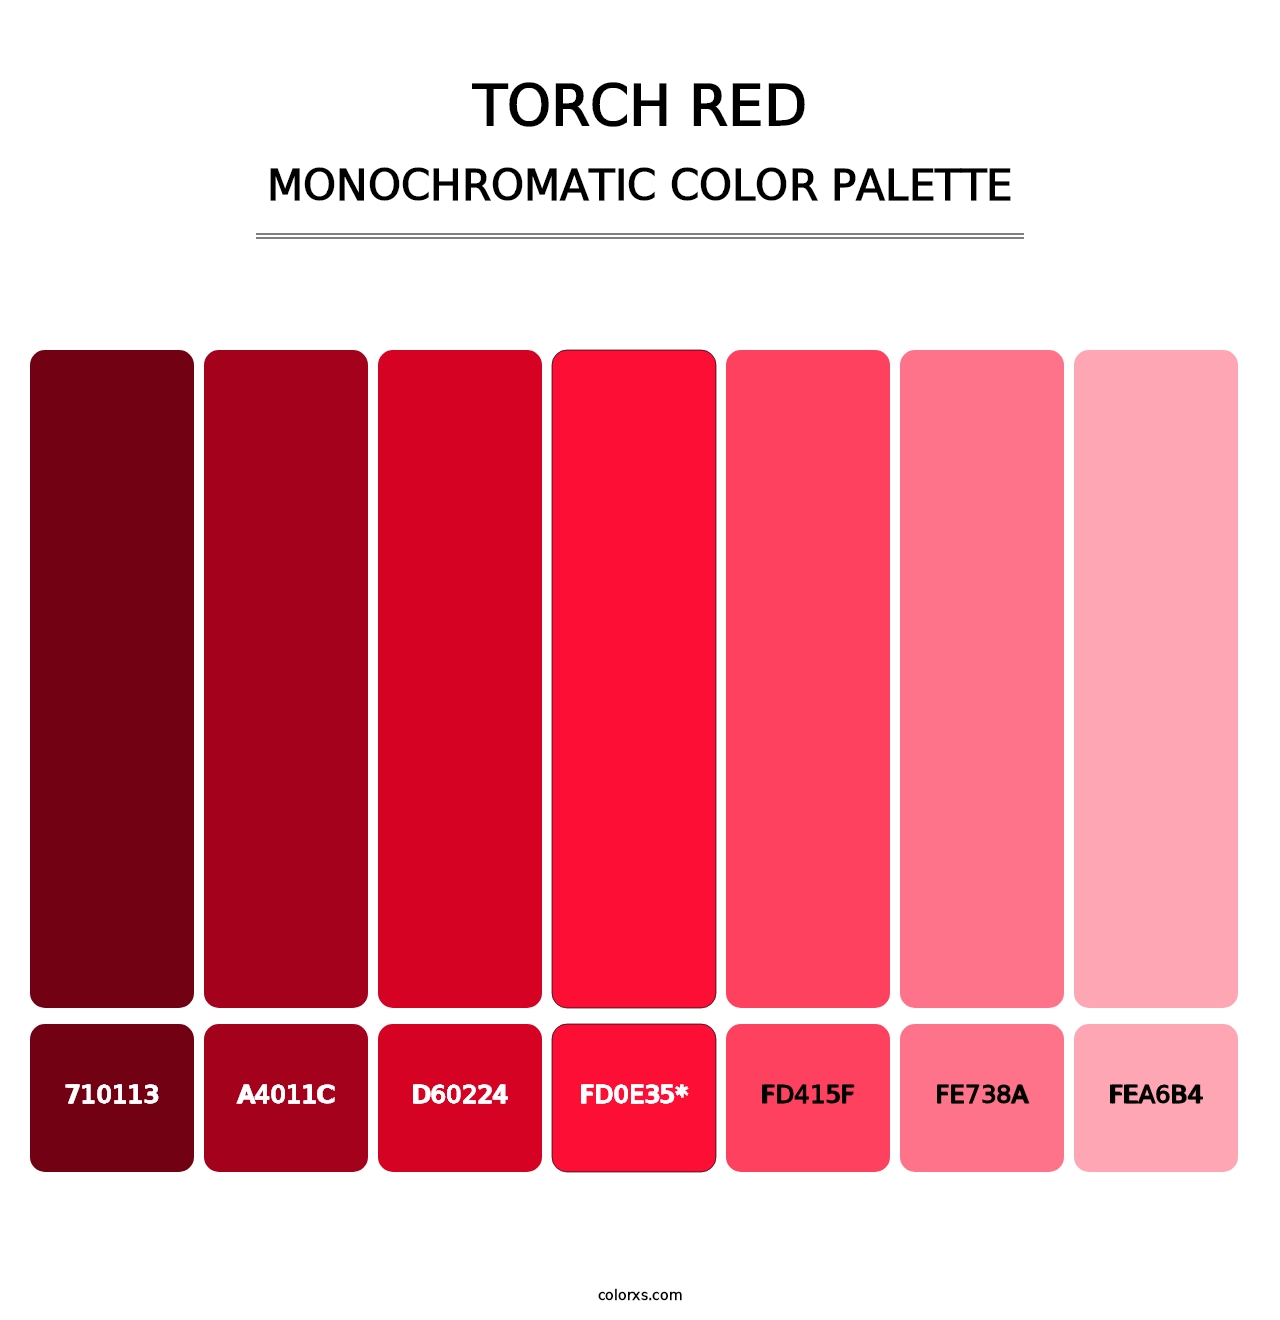 Torch Red - Monochromatic Color Palette